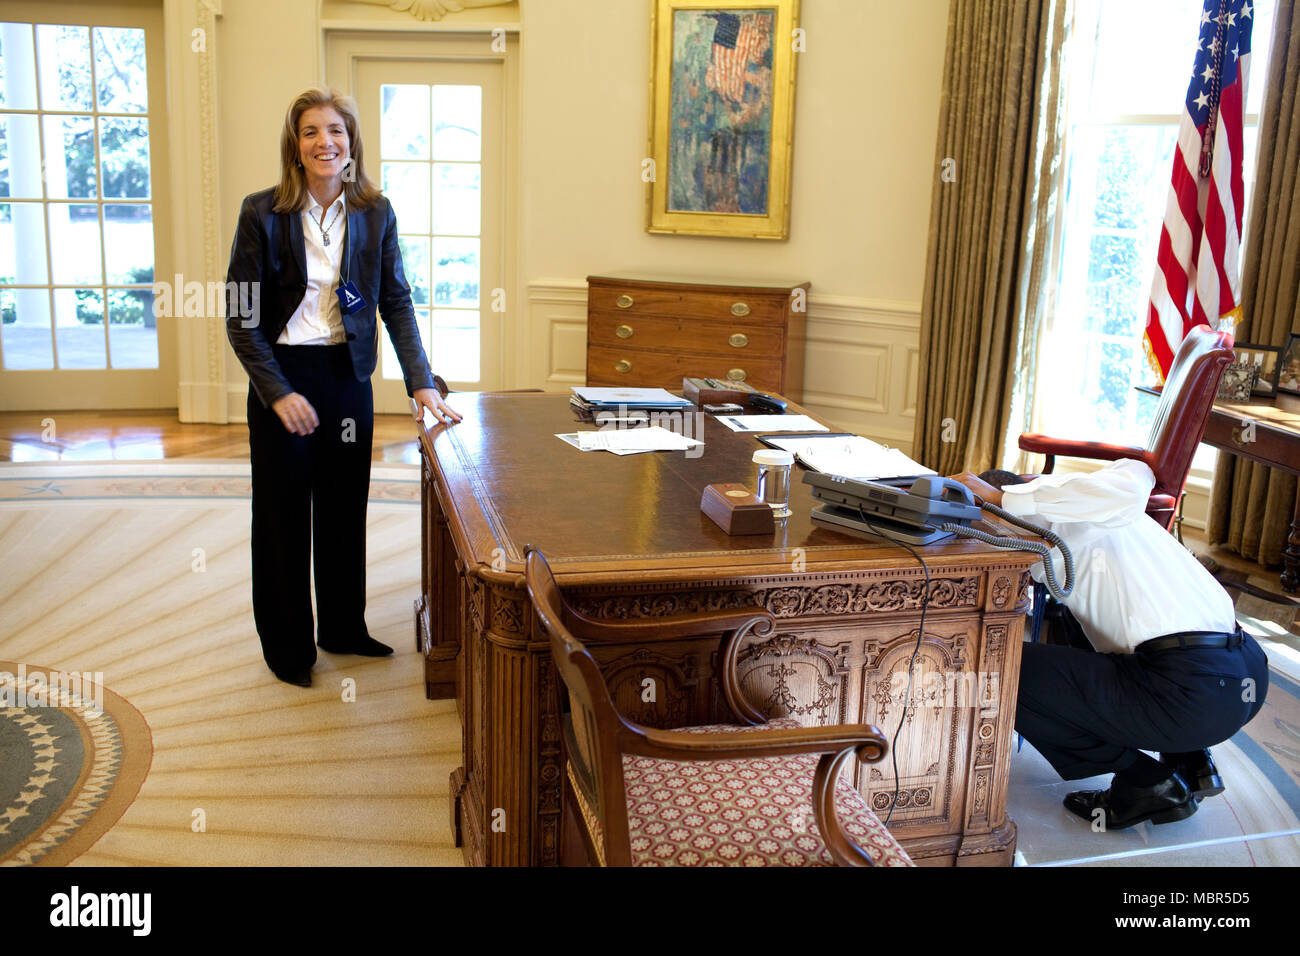 President Barack Obama examines  the Resolute Desk on March 3, 2009, while visiting with Caroline Kennedy Schlossberg in the Oval Office. In a famous photograph, her brother John F. Kennedy Jr., peeked through the FDR panel, while his father President Kennedy worked. .Official White House Photo by Pete Souza Stock Photo